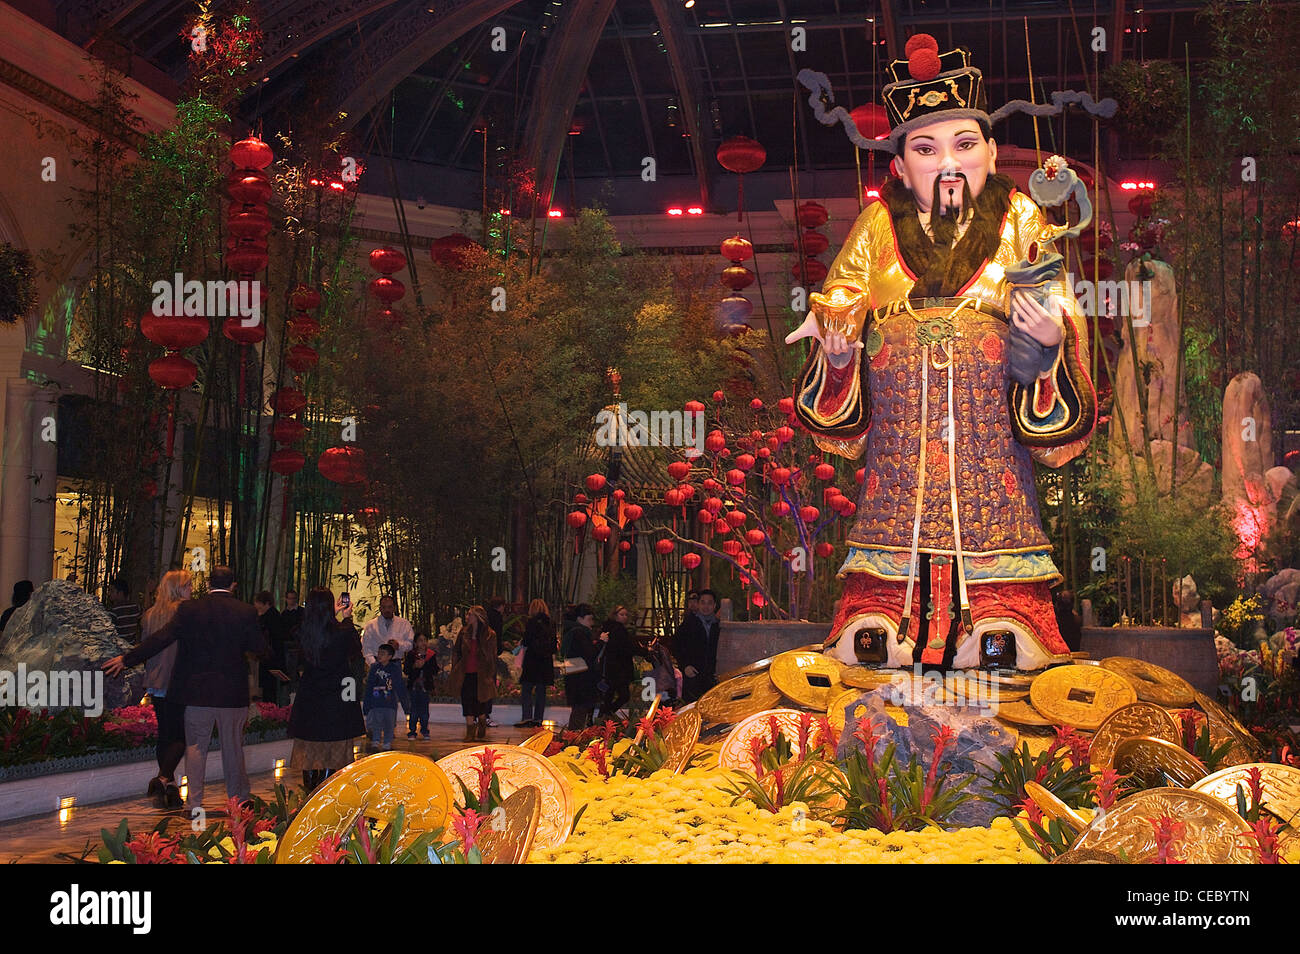 Las Vegas' s Bellagio Conservatory at night, decorated for Chinese New Year Stock Photo